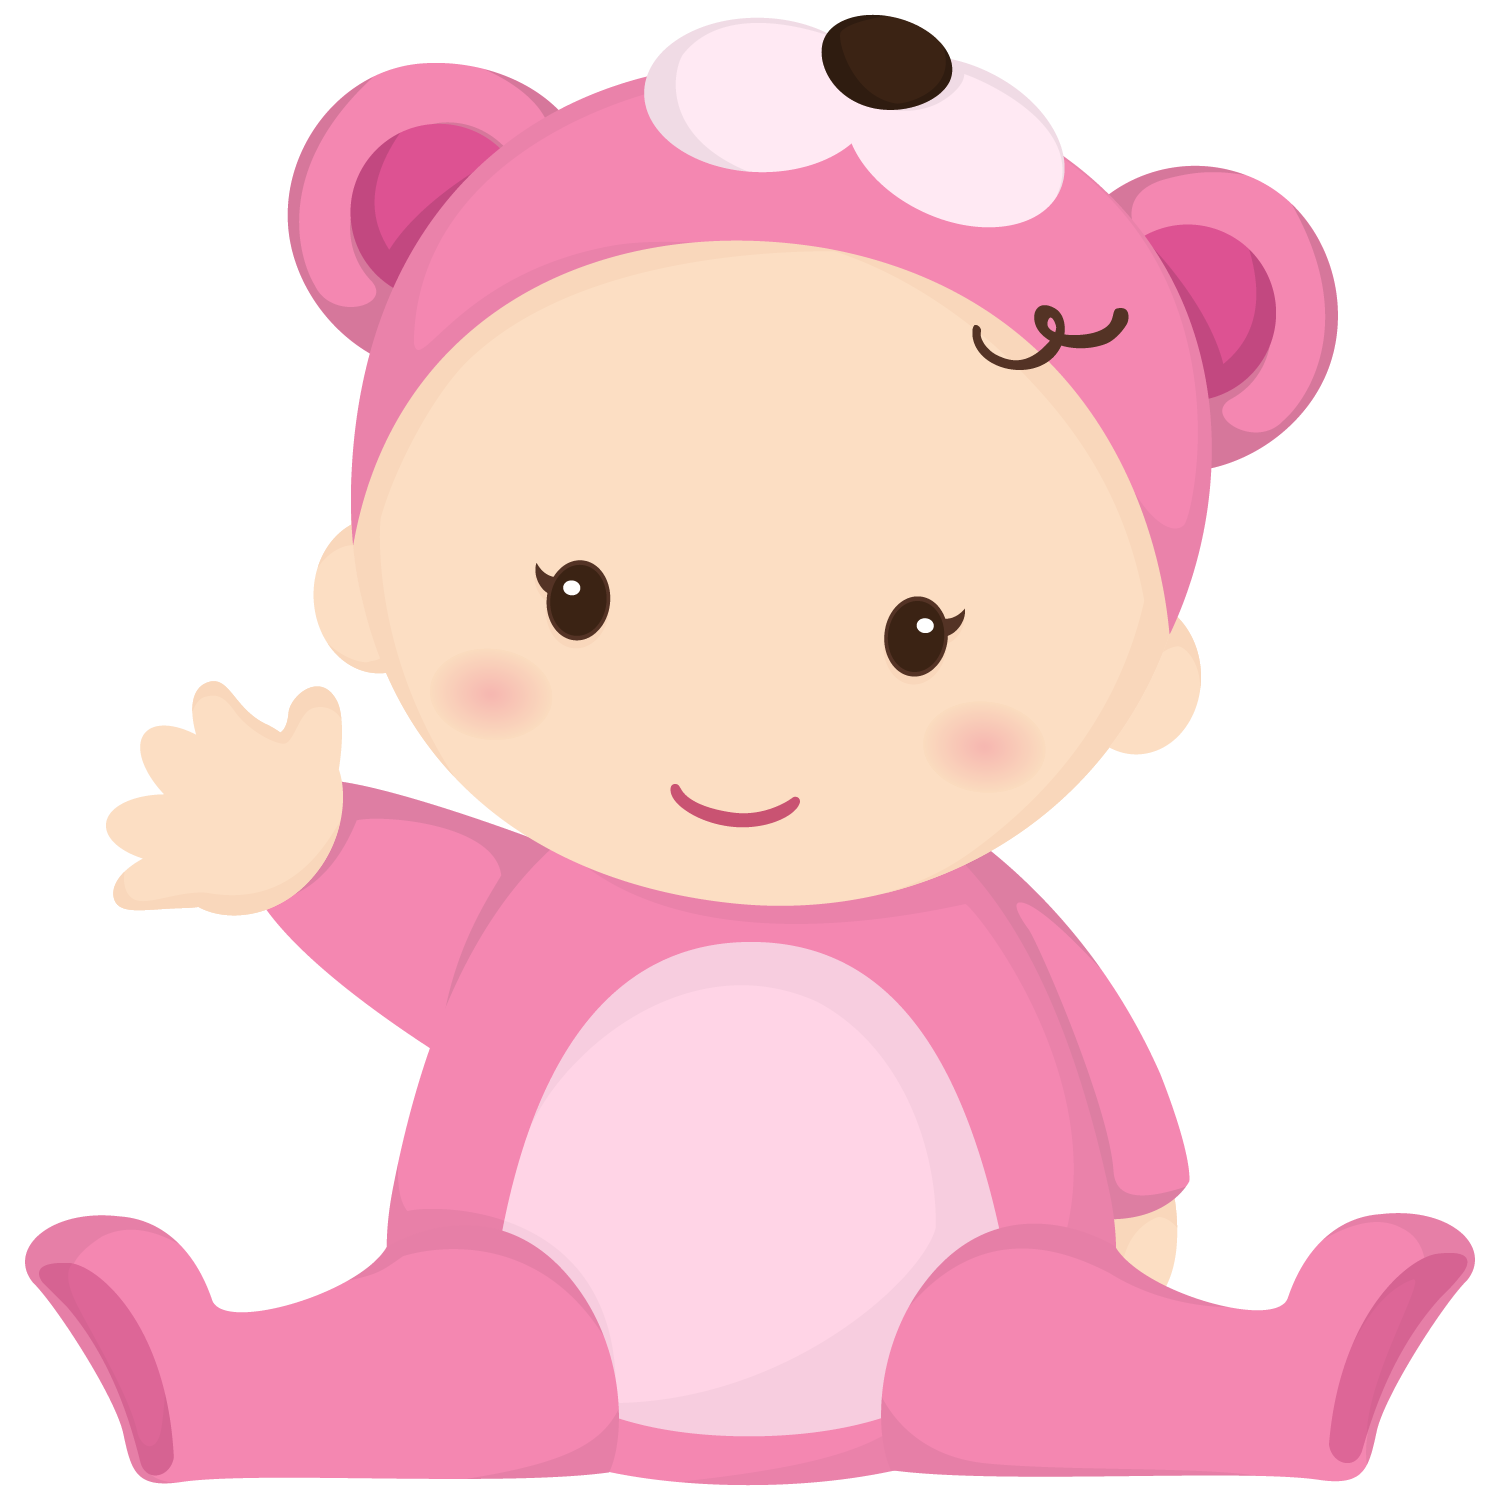 doll clipart baby doll